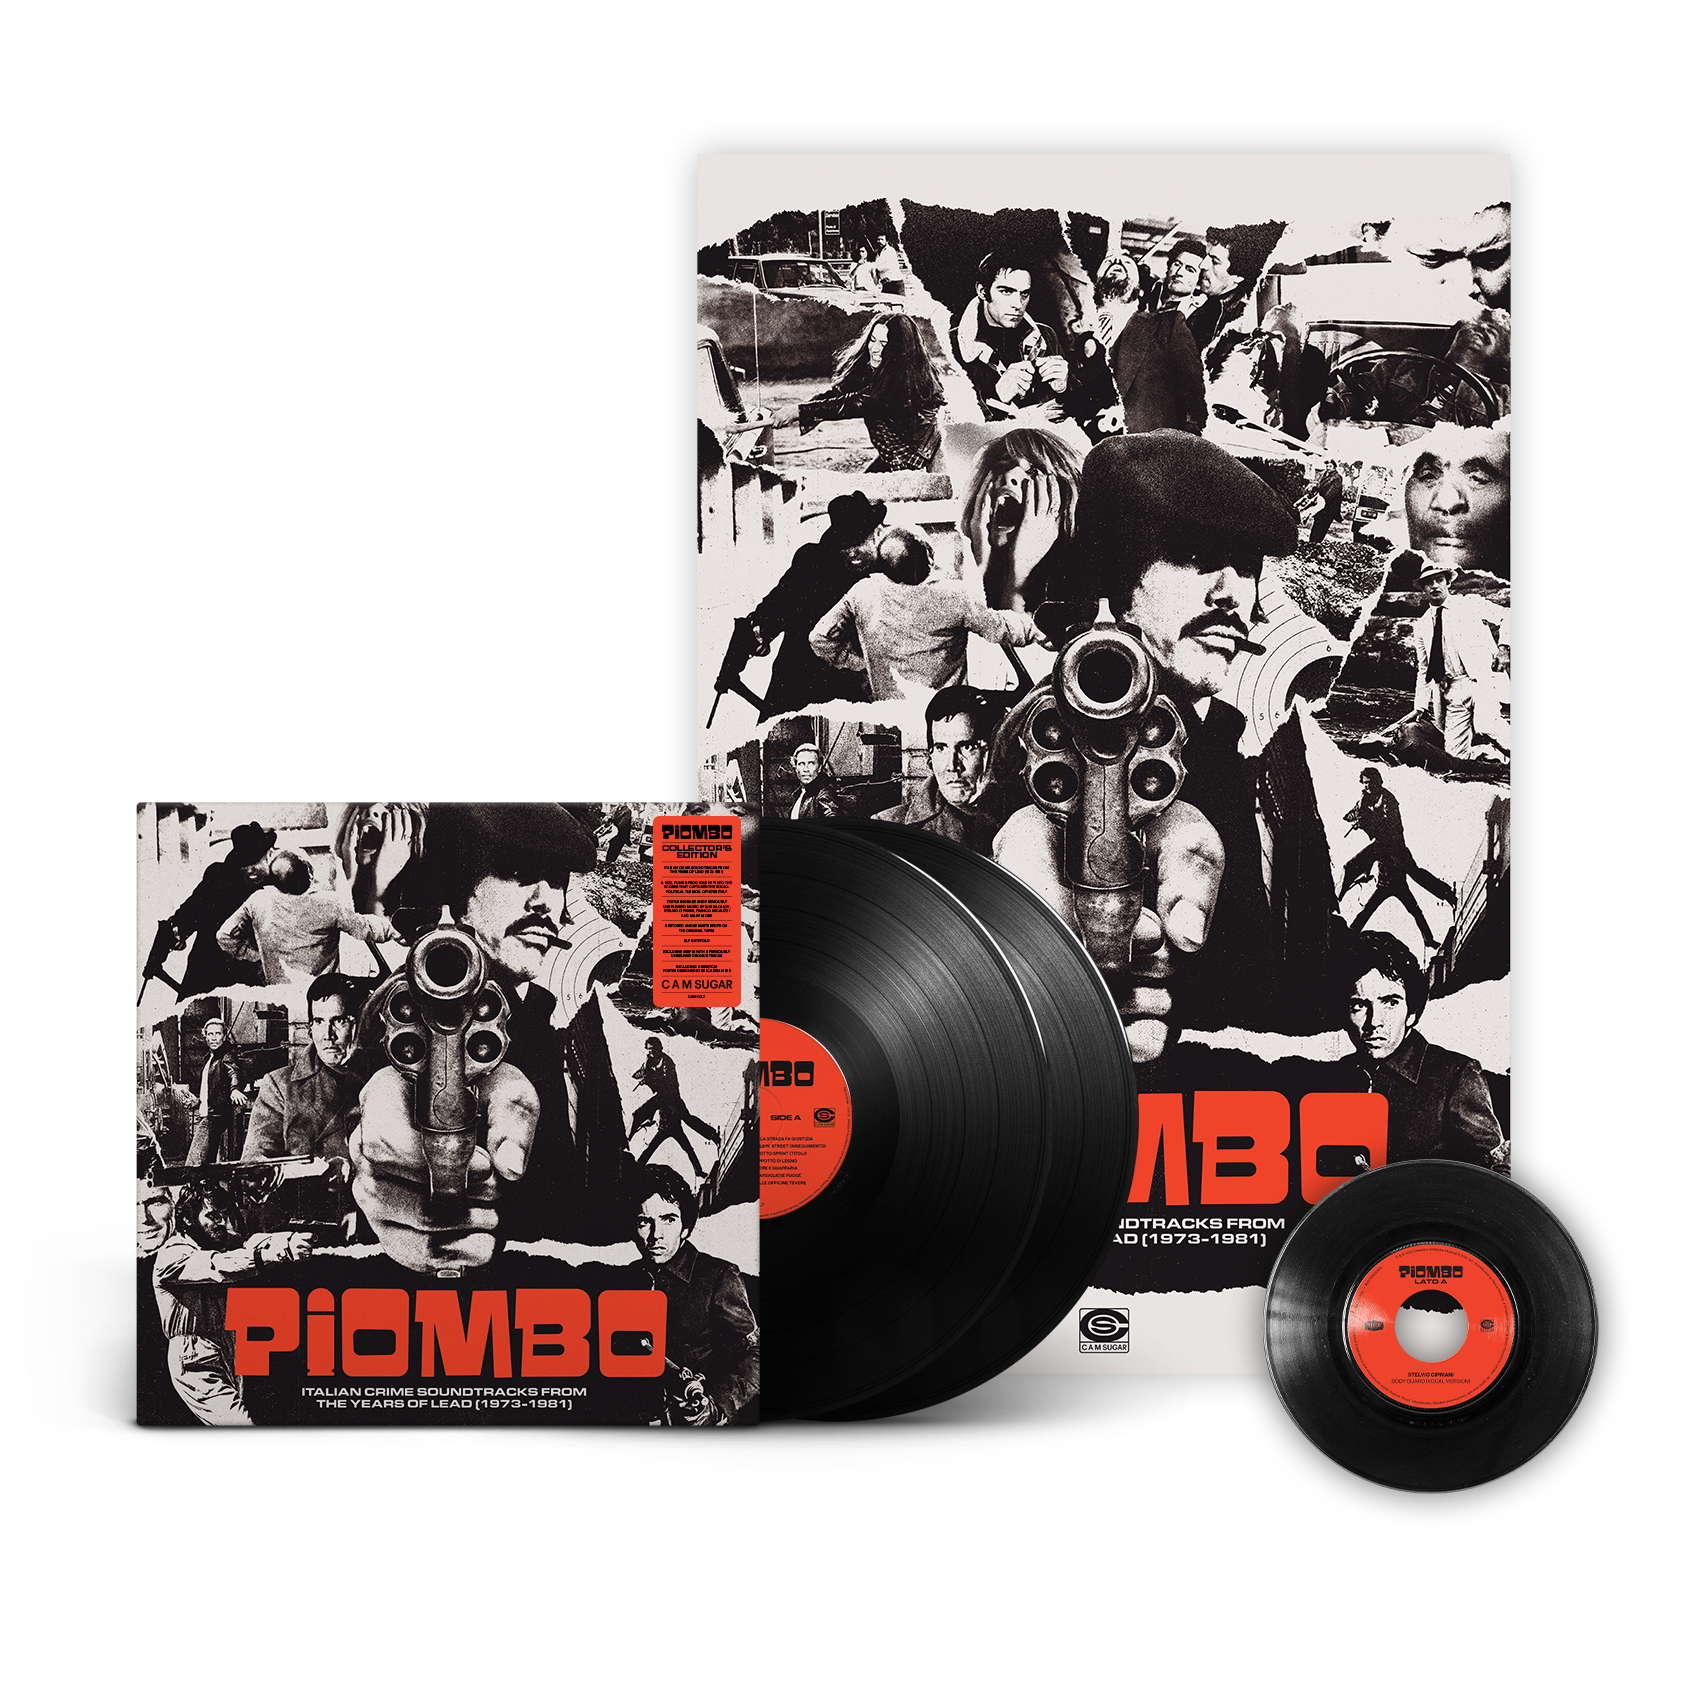 Various Artists - PIOMBO - Italian Crime Soundtracks From The Years Of Lead (1973-1981) Collector's Edition (Gatefold 2LP + 7” with 2 Bonus Tracks + Original Poster)